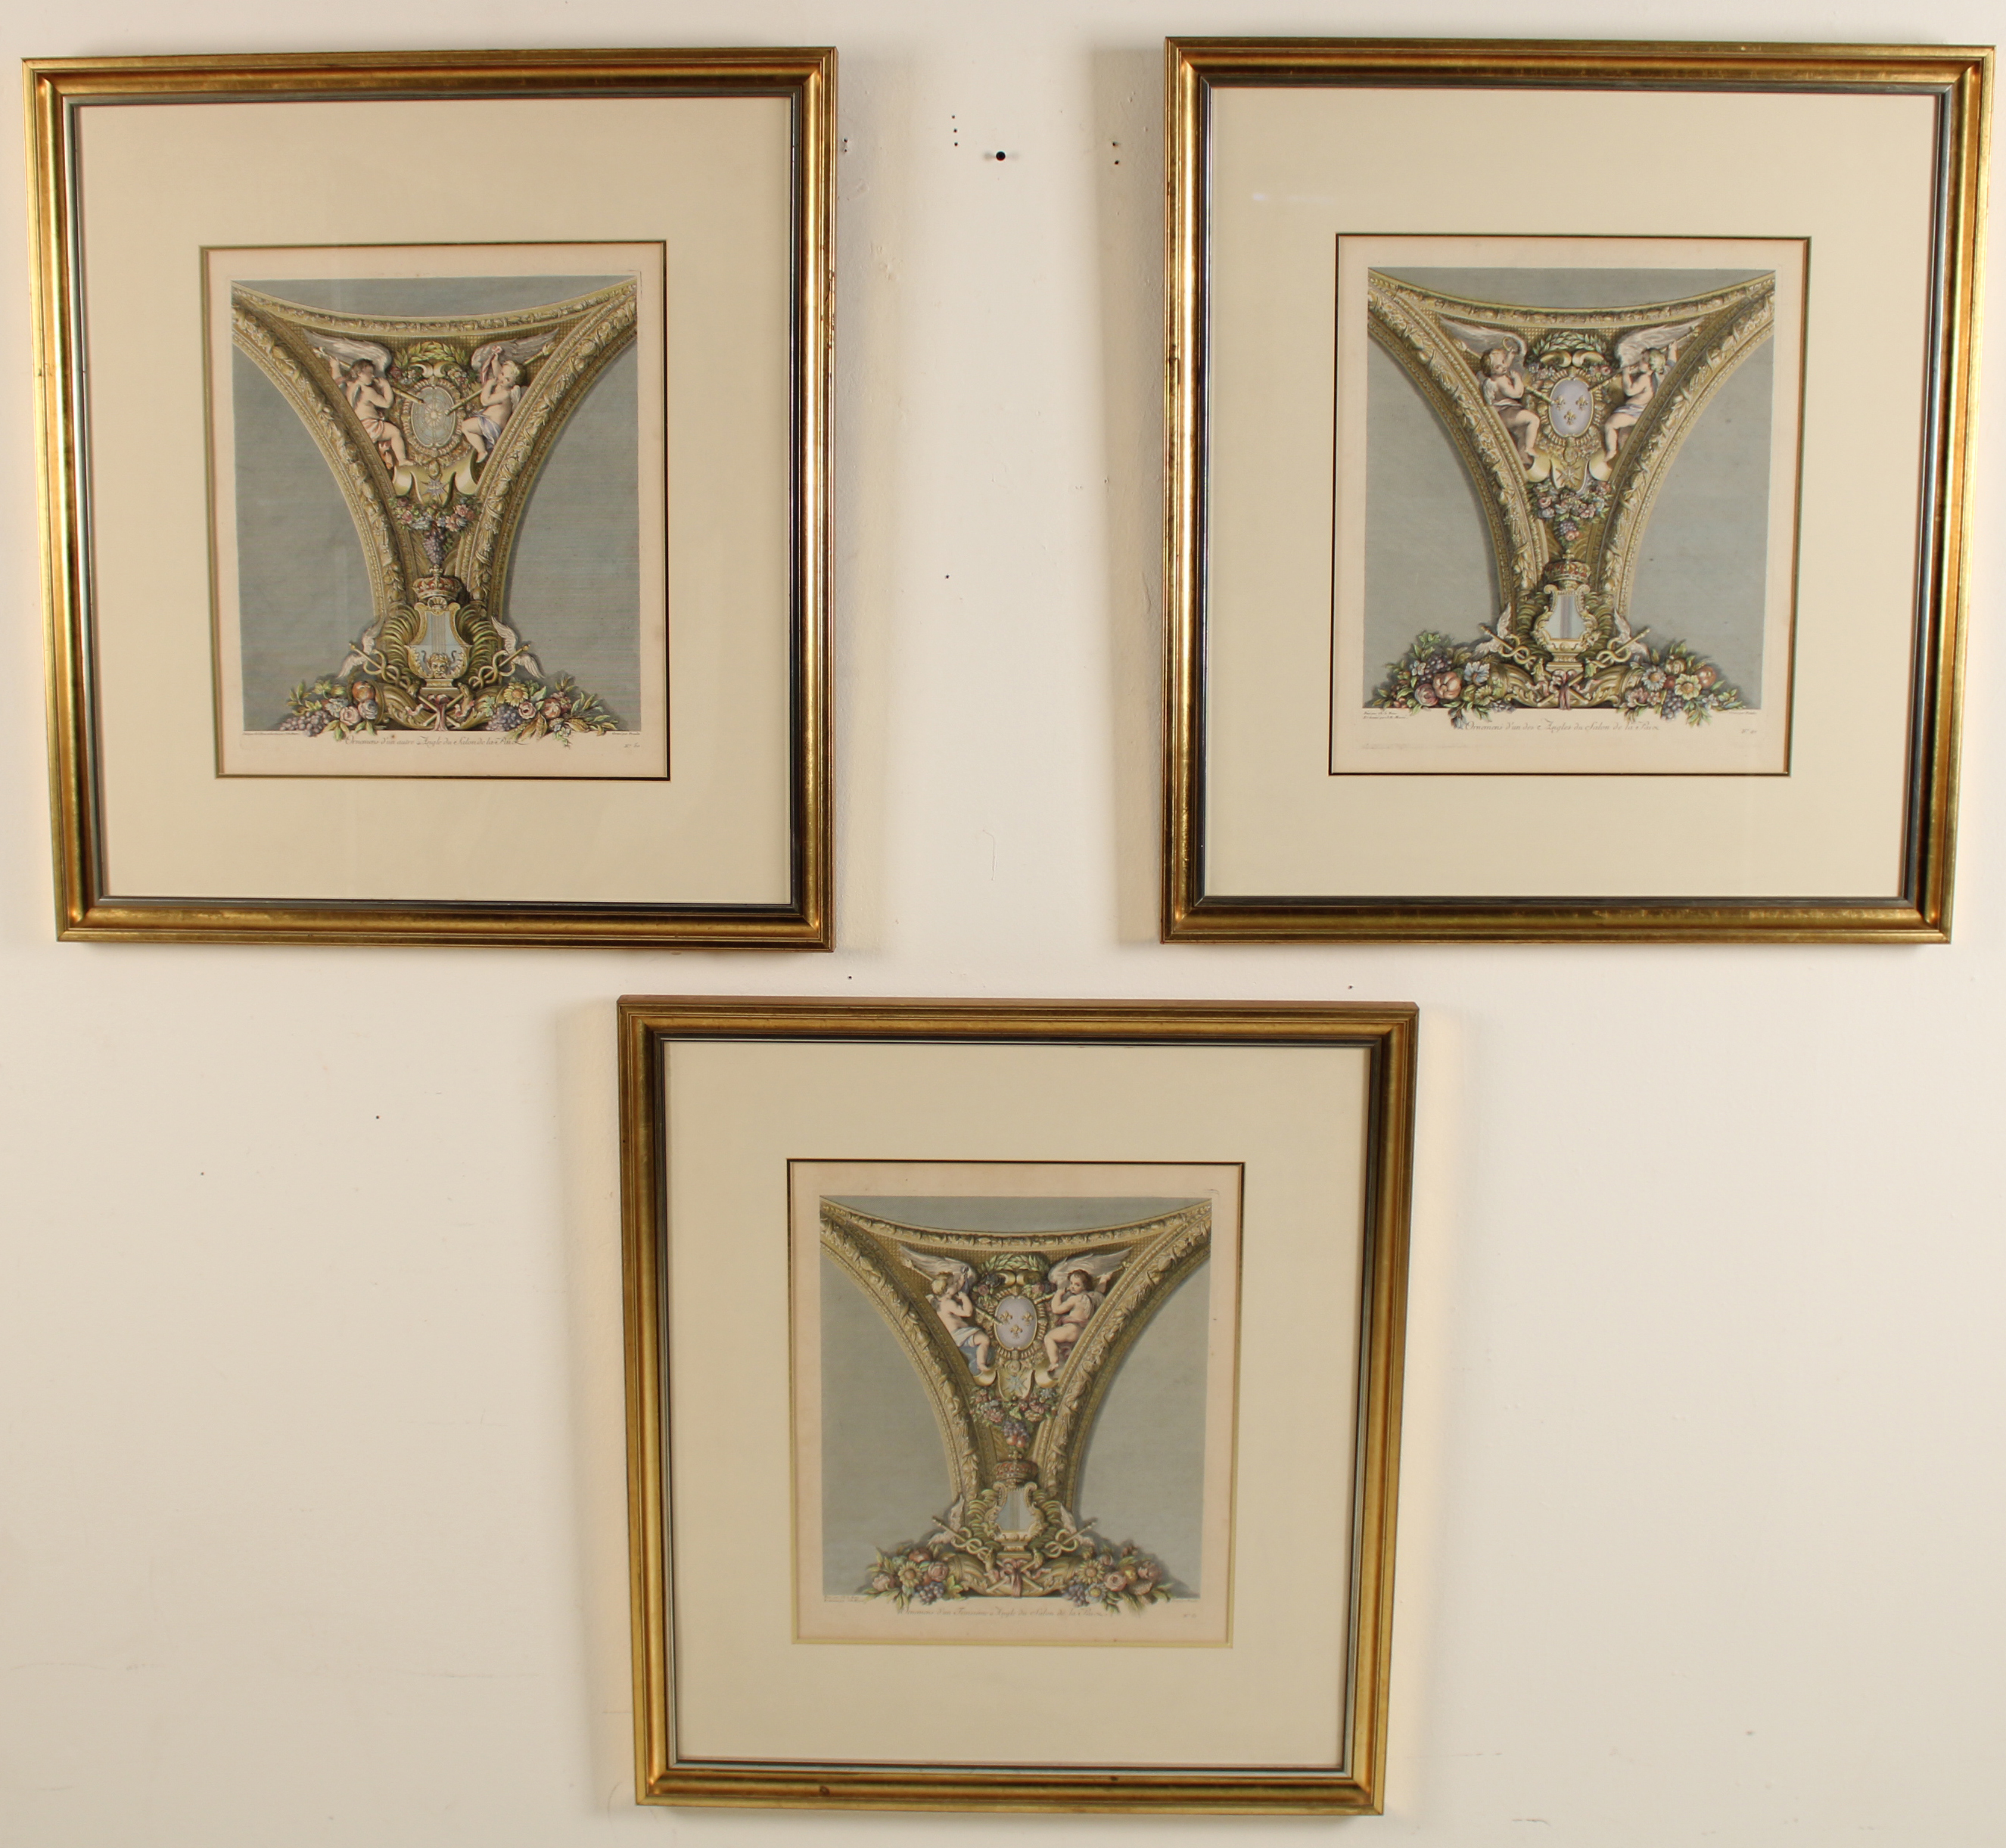 3 FRAMED FRENCH HAND COLORED STEEL